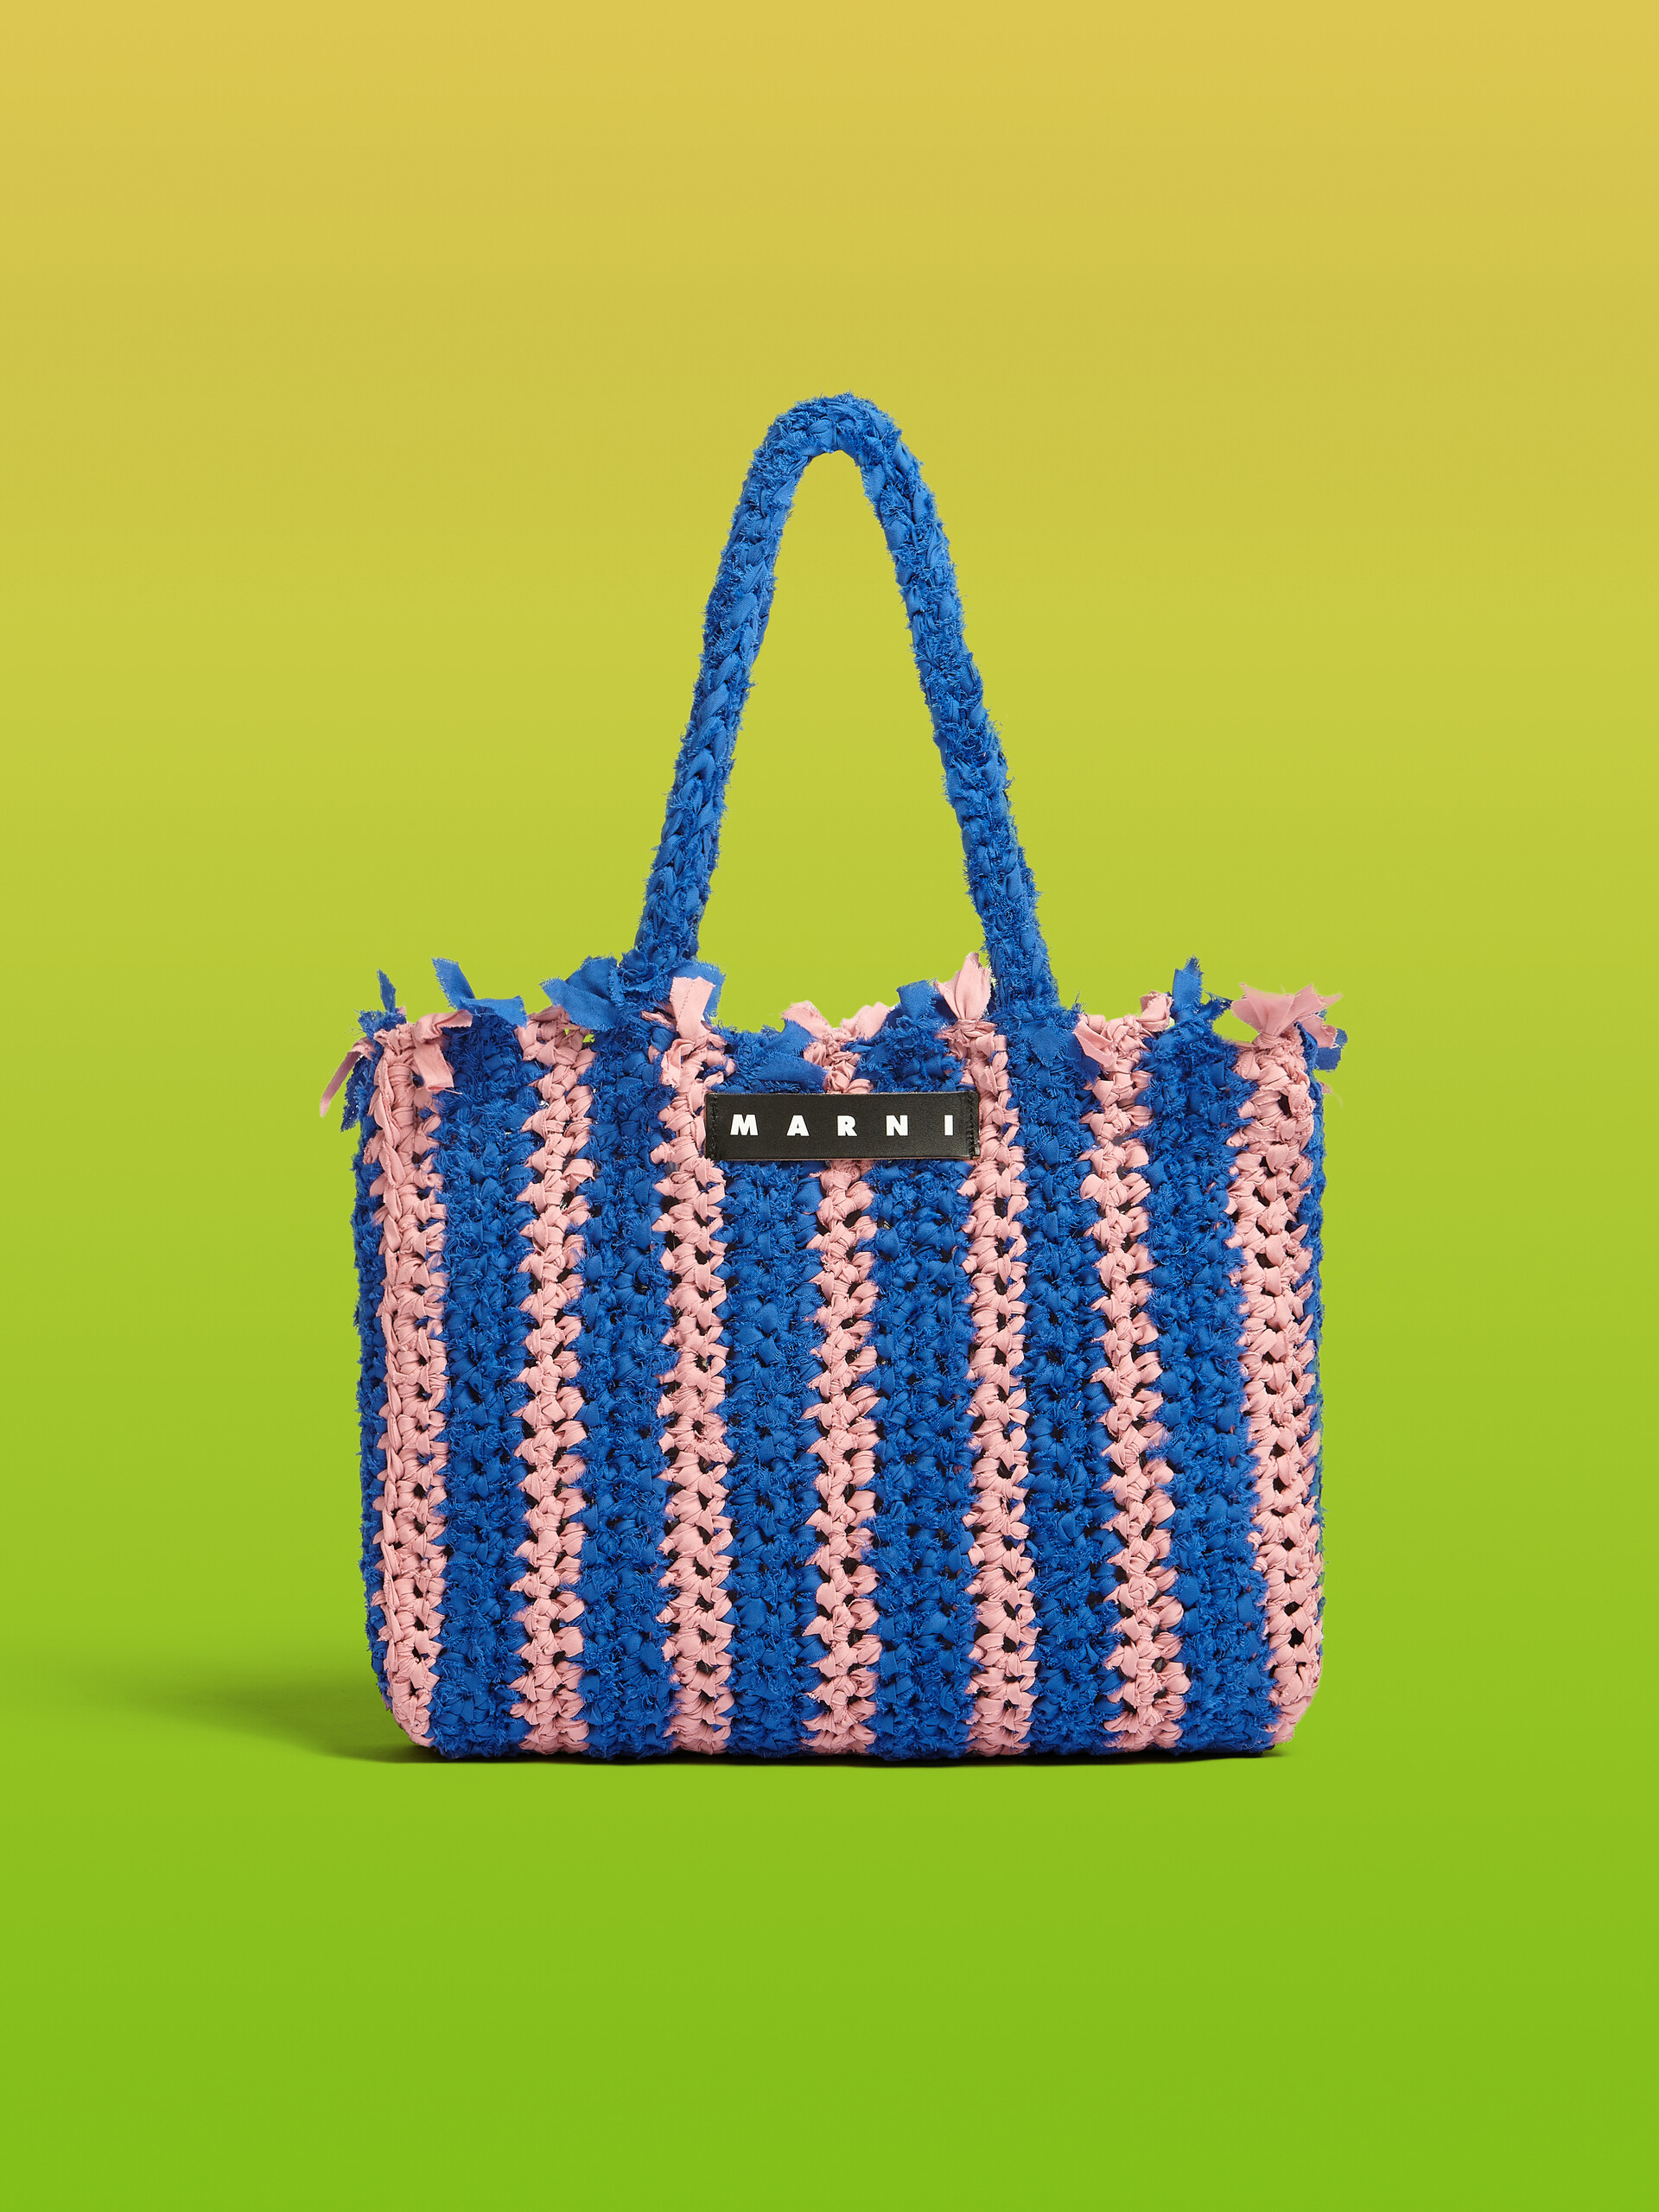 MARNI MARKET bag in pink and blue cotton - Bags - Image 1